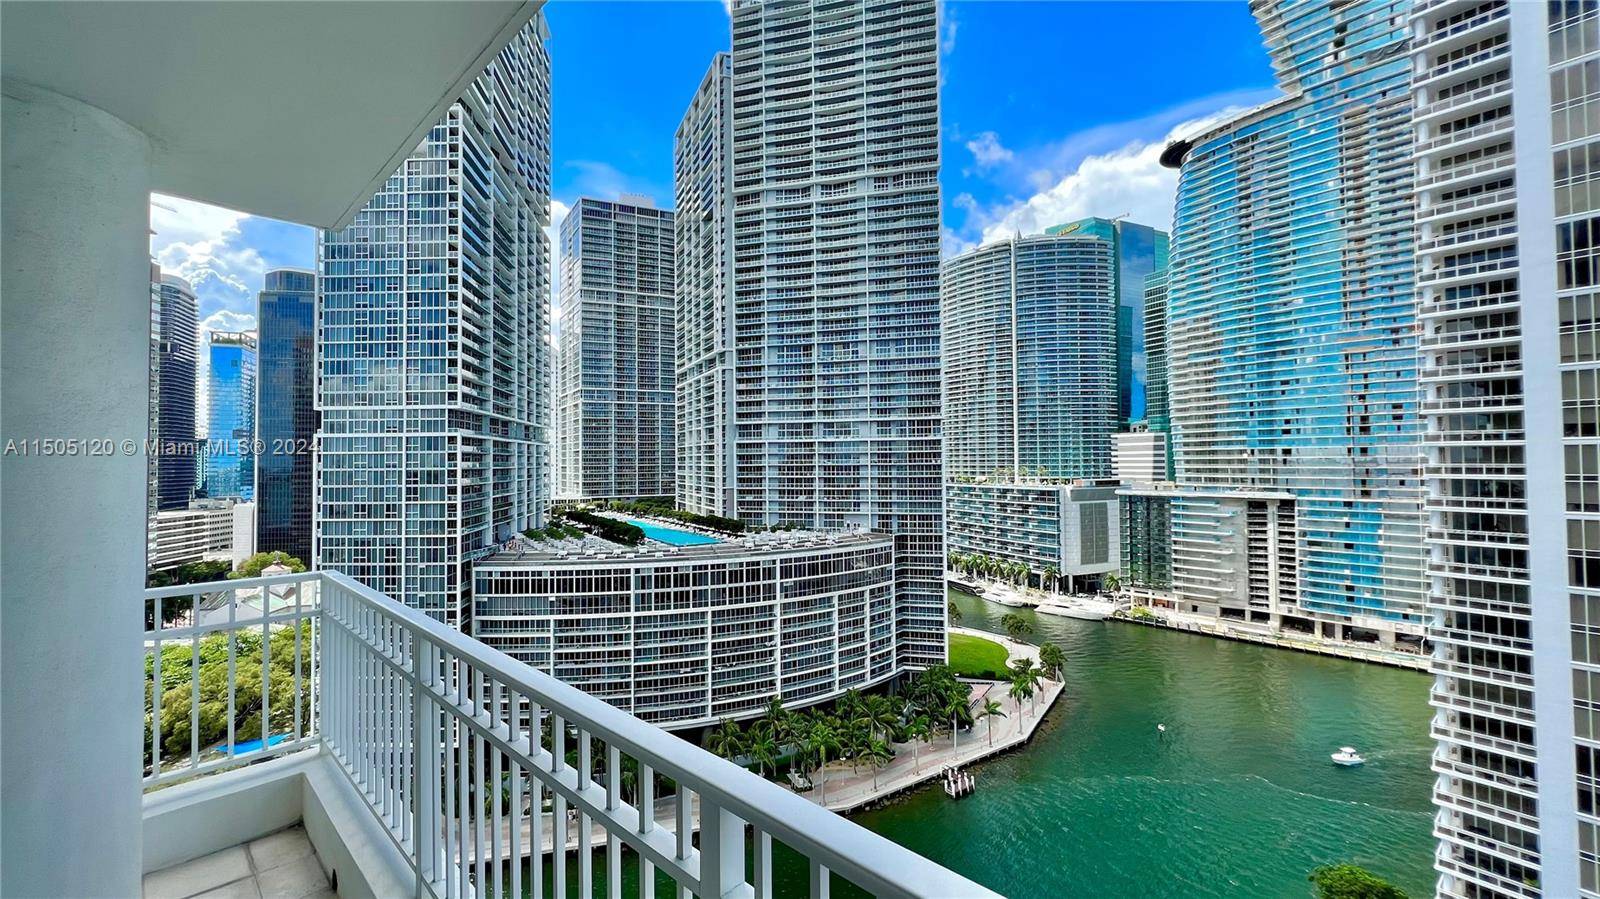 Discover luxury living at Courts Brickell Key, Miami.